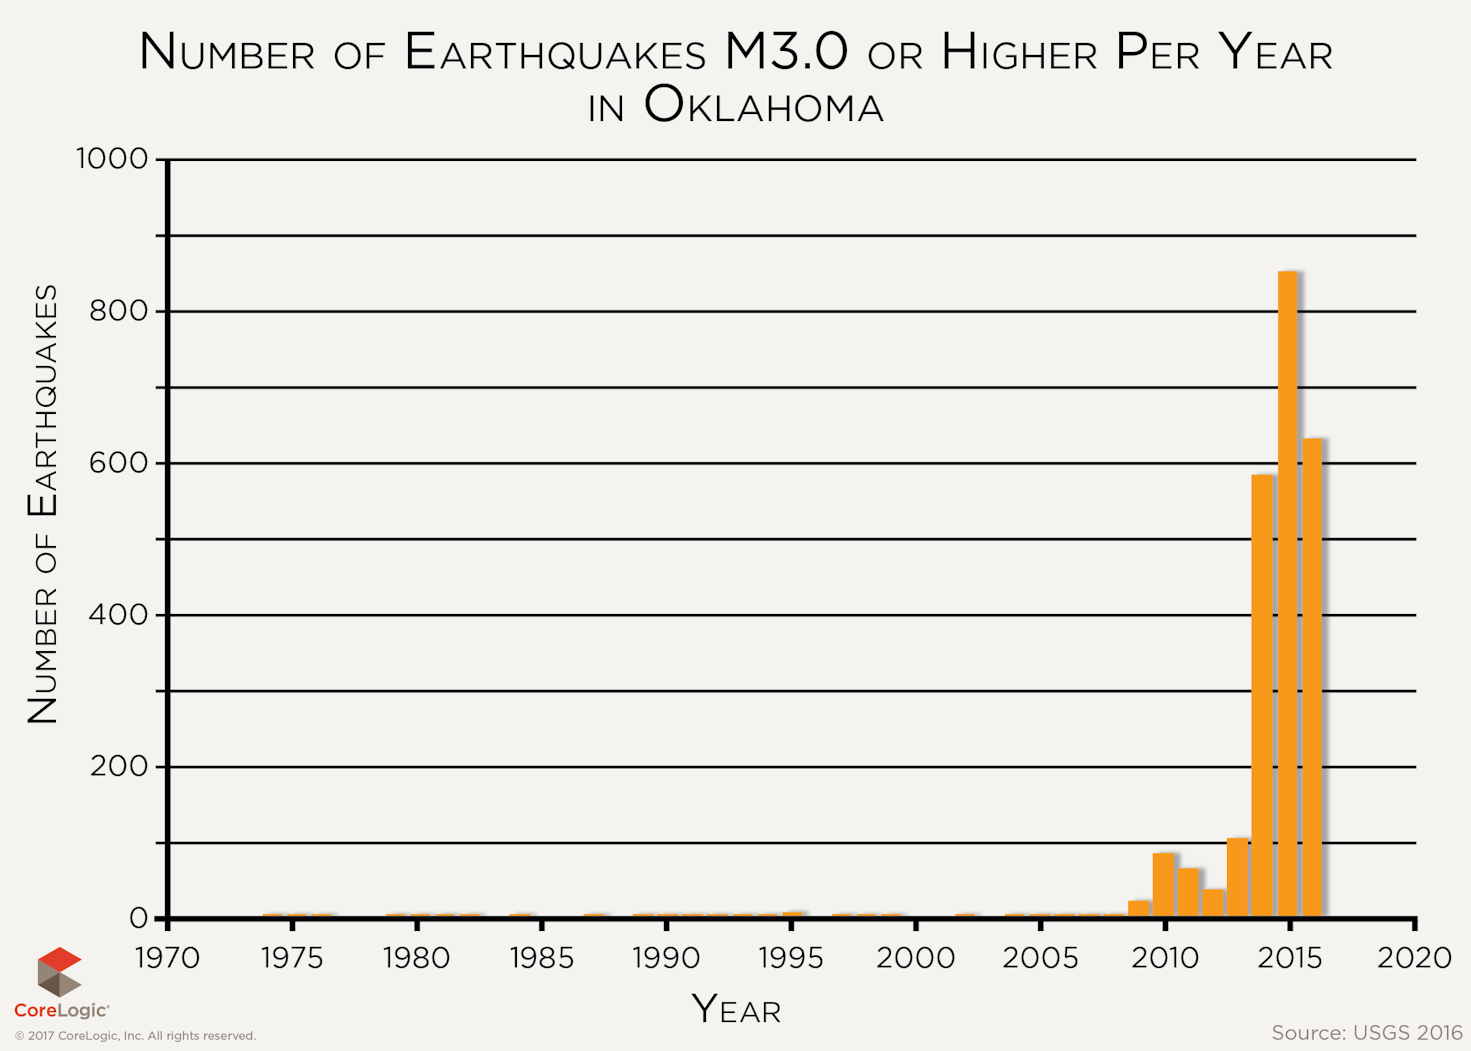 Oklahoma Earthquake Risk: What a Difference Year Makes